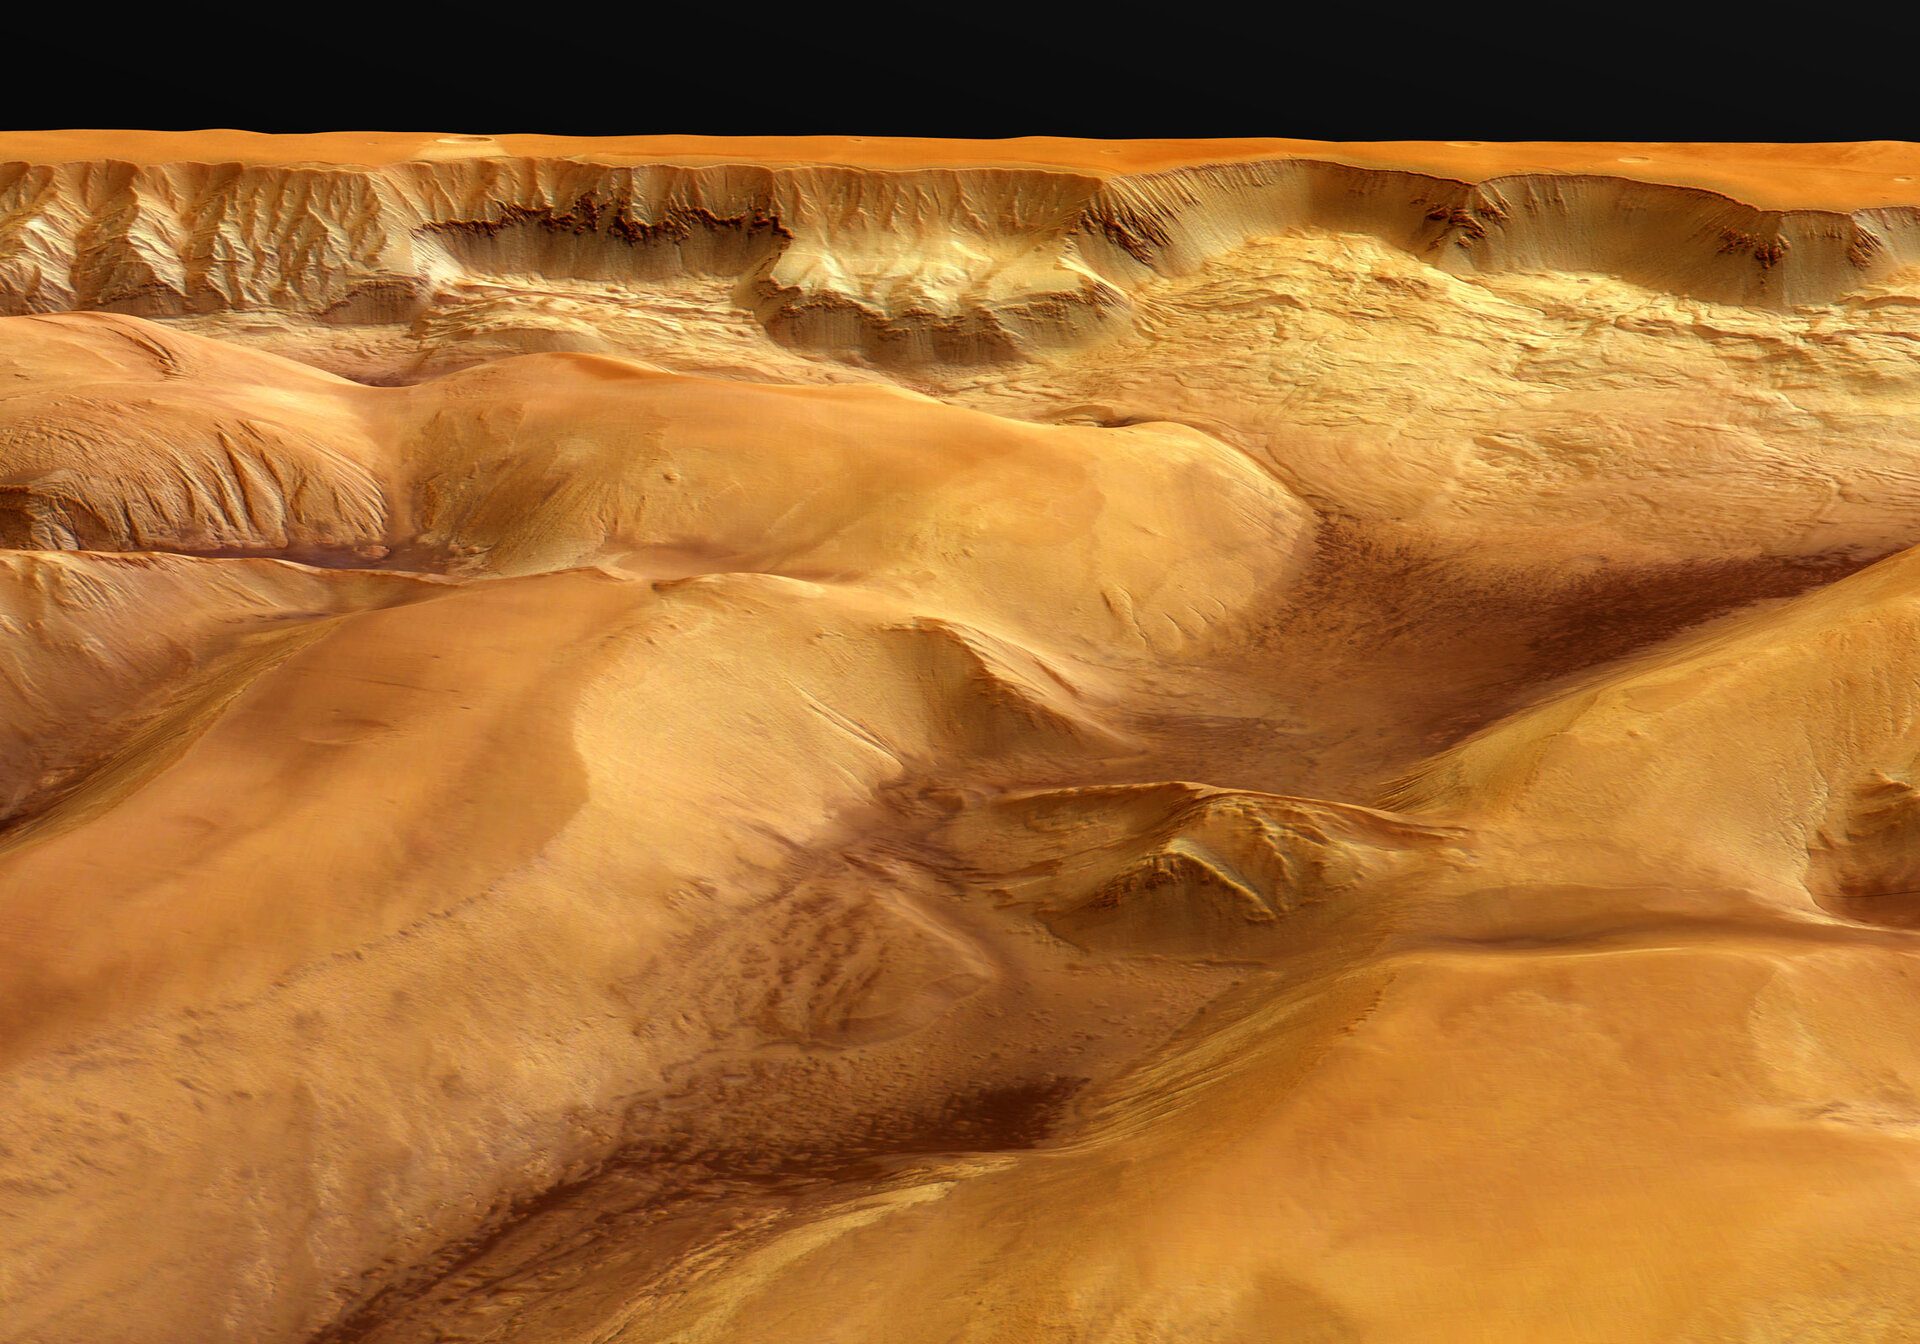 Close-up perspective view of Ophir Chasma, looking north